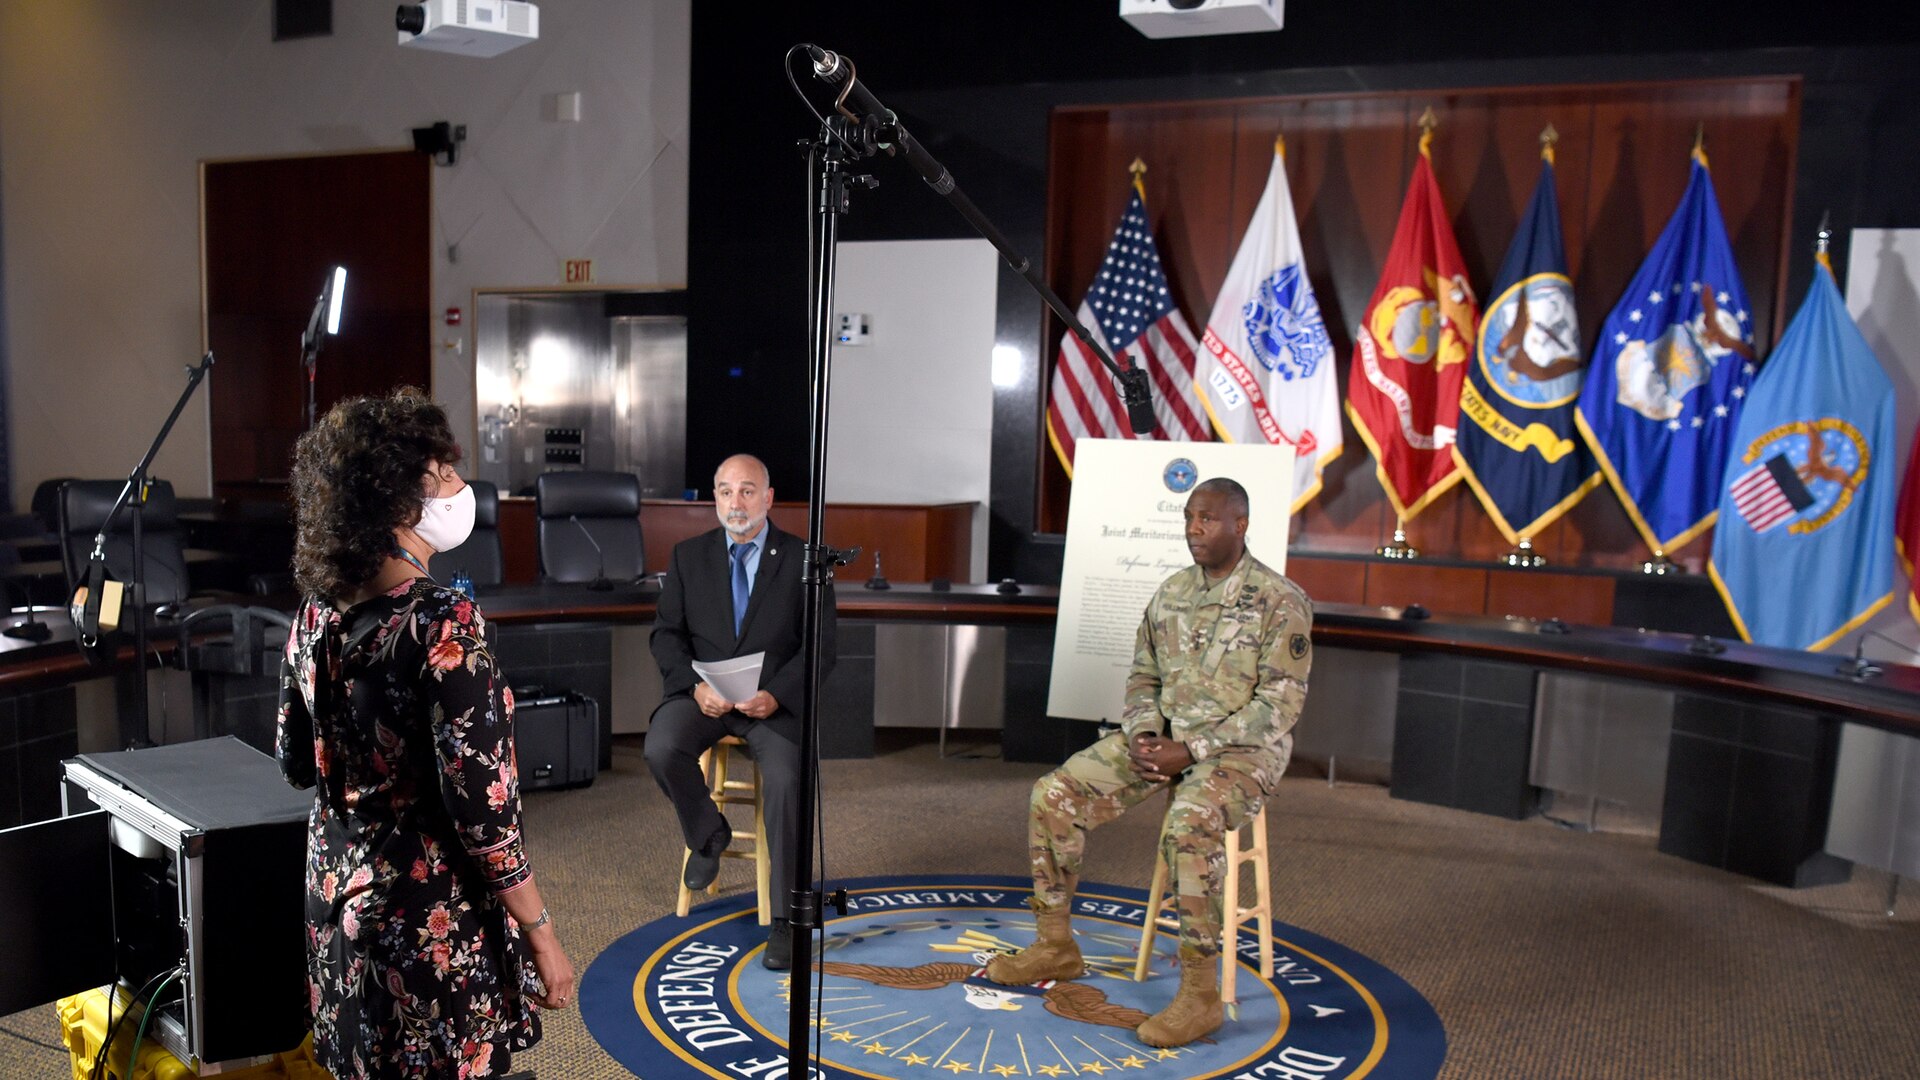 Two men - one white wearing a suit, the other black in an Army uniform - sit on stools with flags behind them as a woman in a white face mask stands in front of them. A tall, arching light illuminates the men.